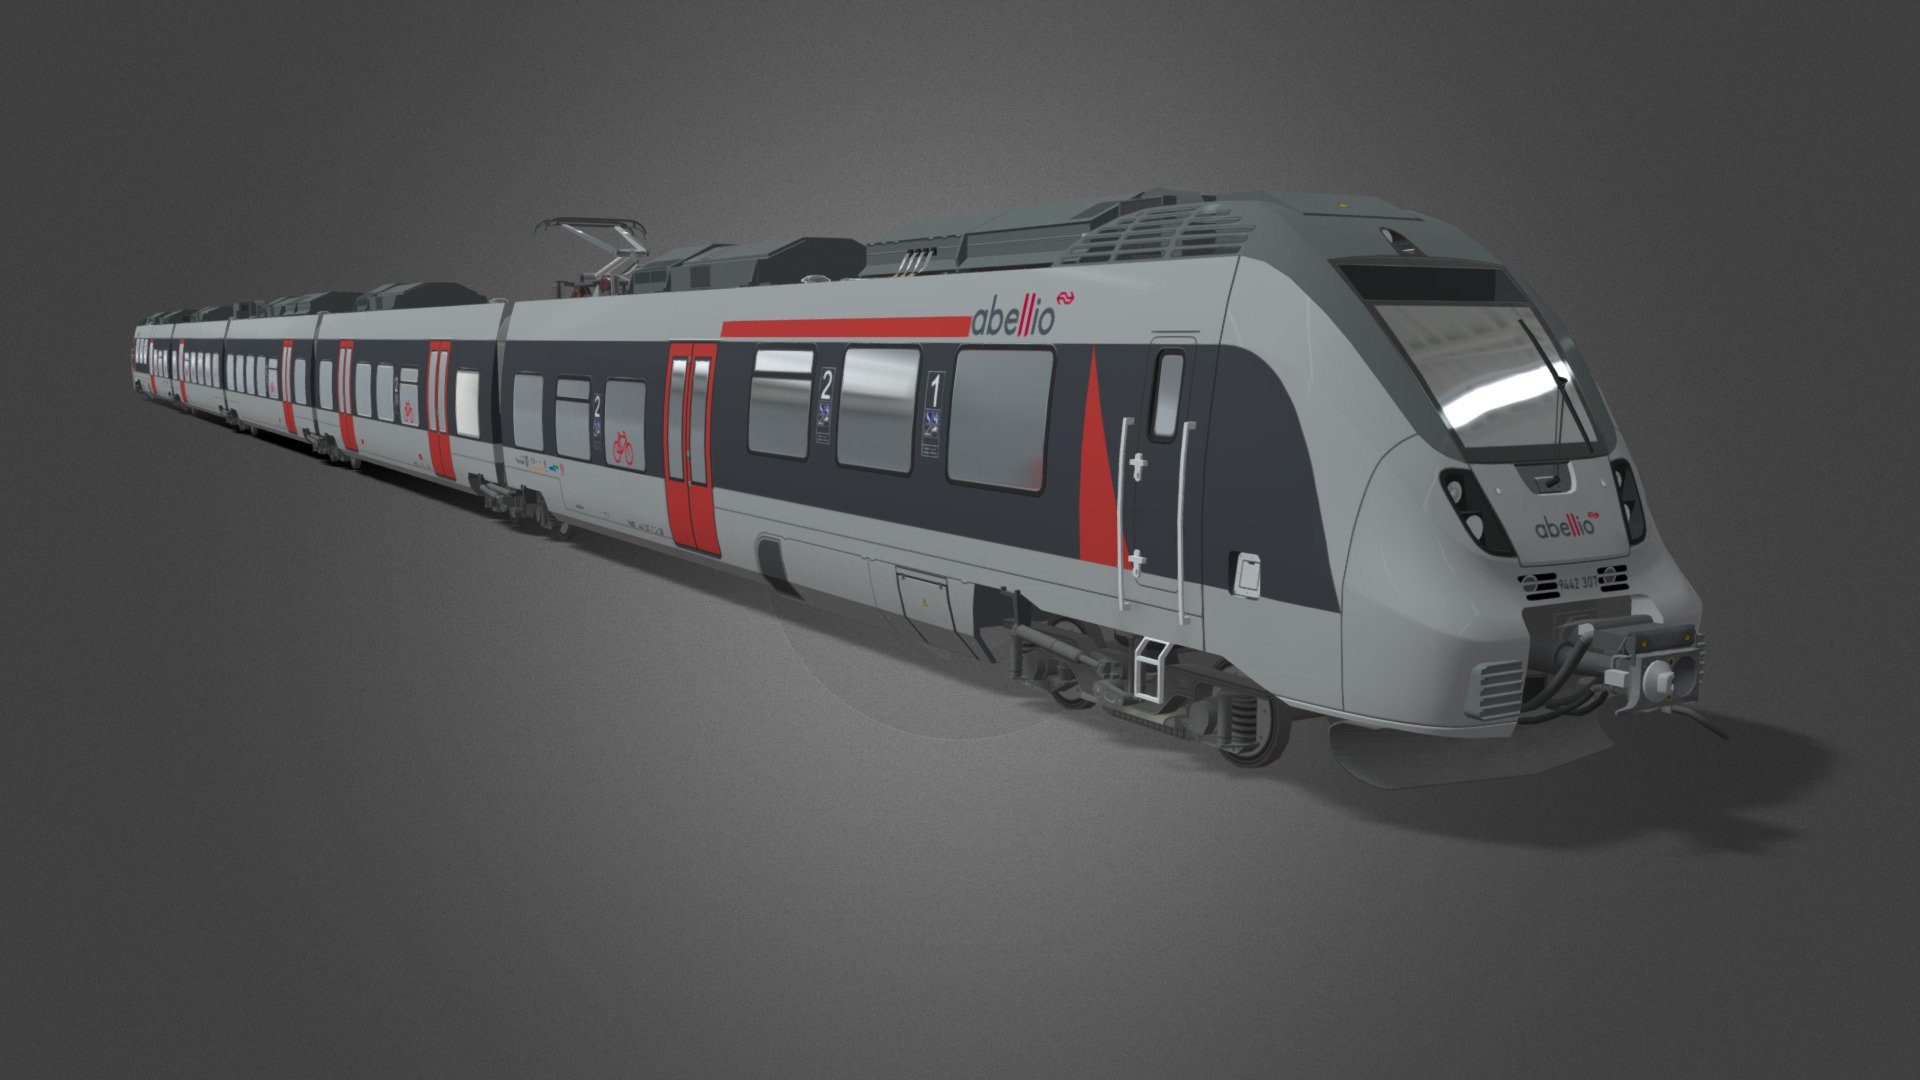 Bombardier Talent 2 in Abellio Rail Mitteldauschland livery. This model was originally made as an asset for the game Cities: Skylines. There are simplifications to the texture and model to keep it optimised for the game.

This model includes a 5-car variant of the Talent 2.

Available formats: Blender (.blend), Wavefront OBJ (.obj), Autodesk FBX (.fbx), STL (.stl)

Model made in Blender 3.0 - Talent 2 (Abellio) - Buy Royalty Free 3D model by Nostrix 3d model